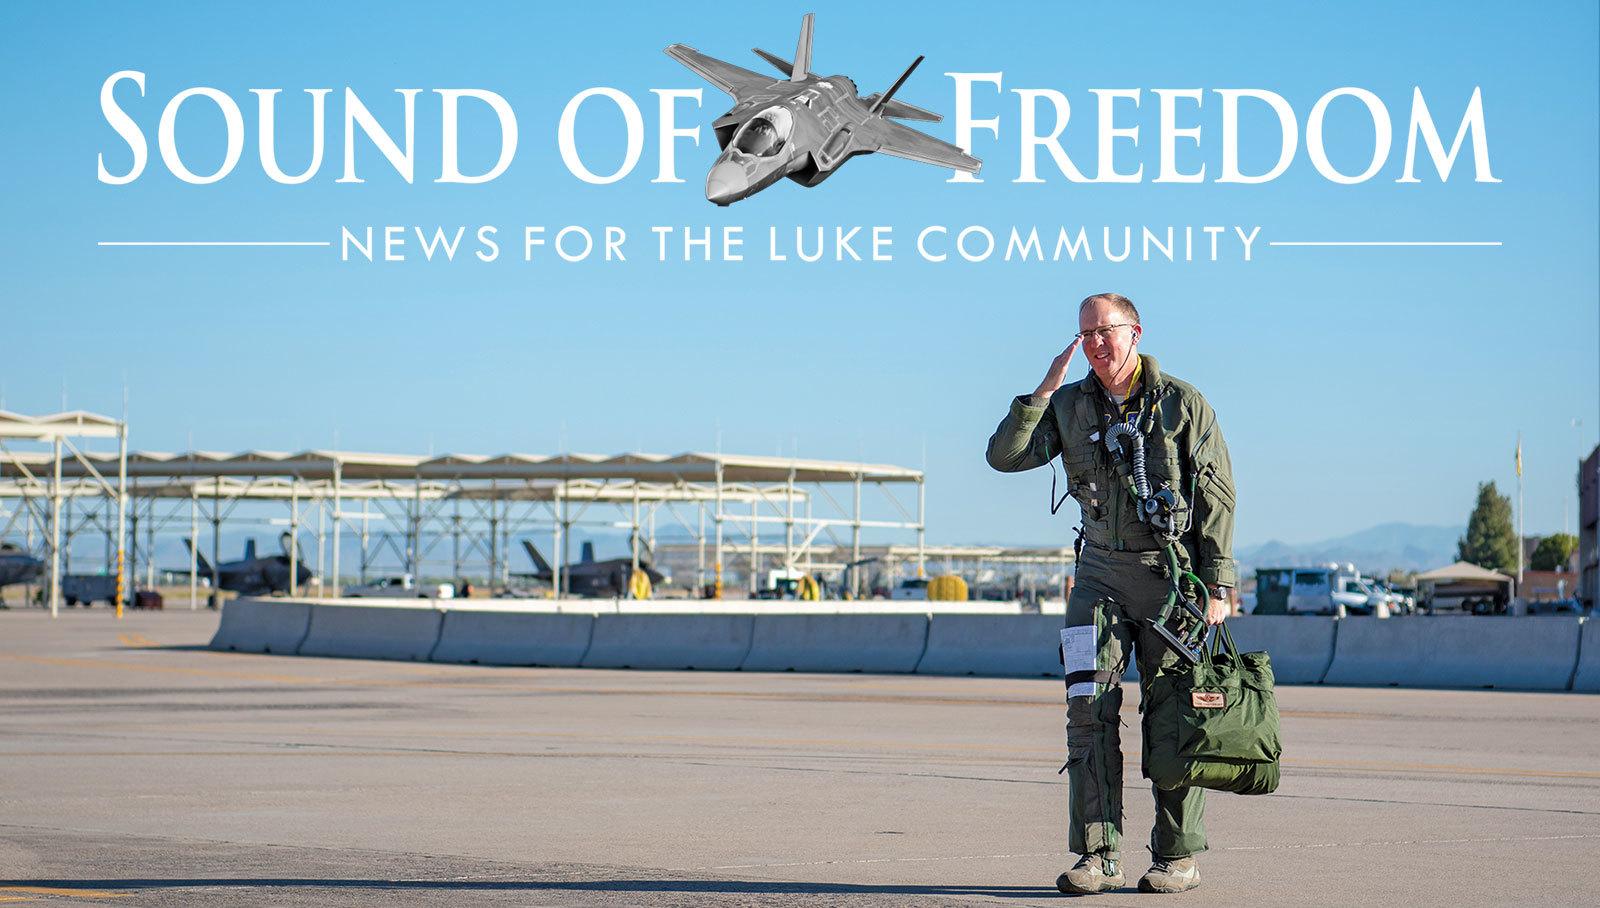 Introducing the Sound of Freedom Magazine